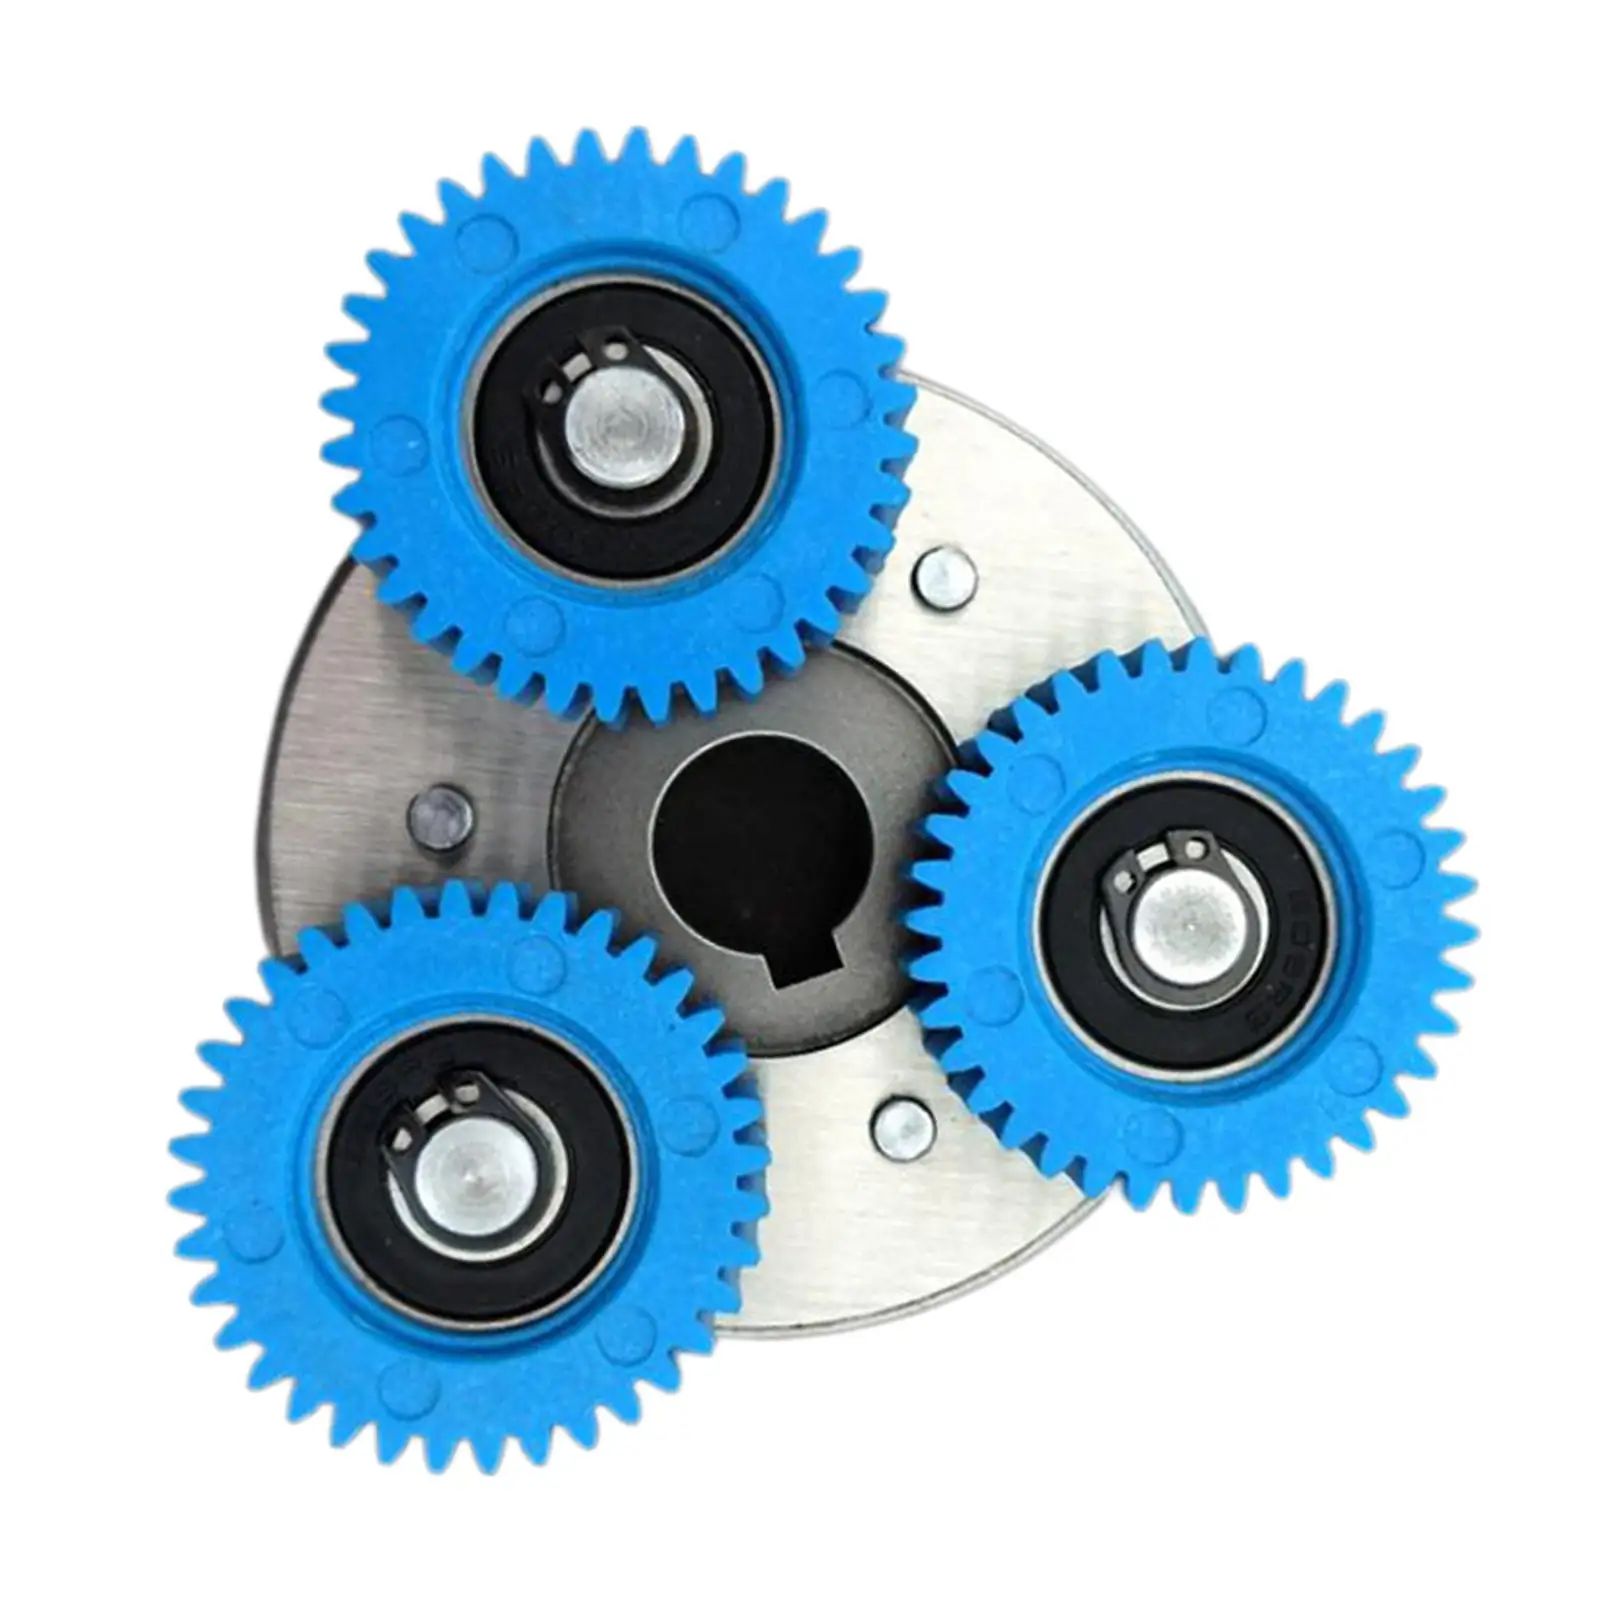 36T Planetary Gear with Clutch, 70mm Clutch,  Part for Motor    Electric Bike